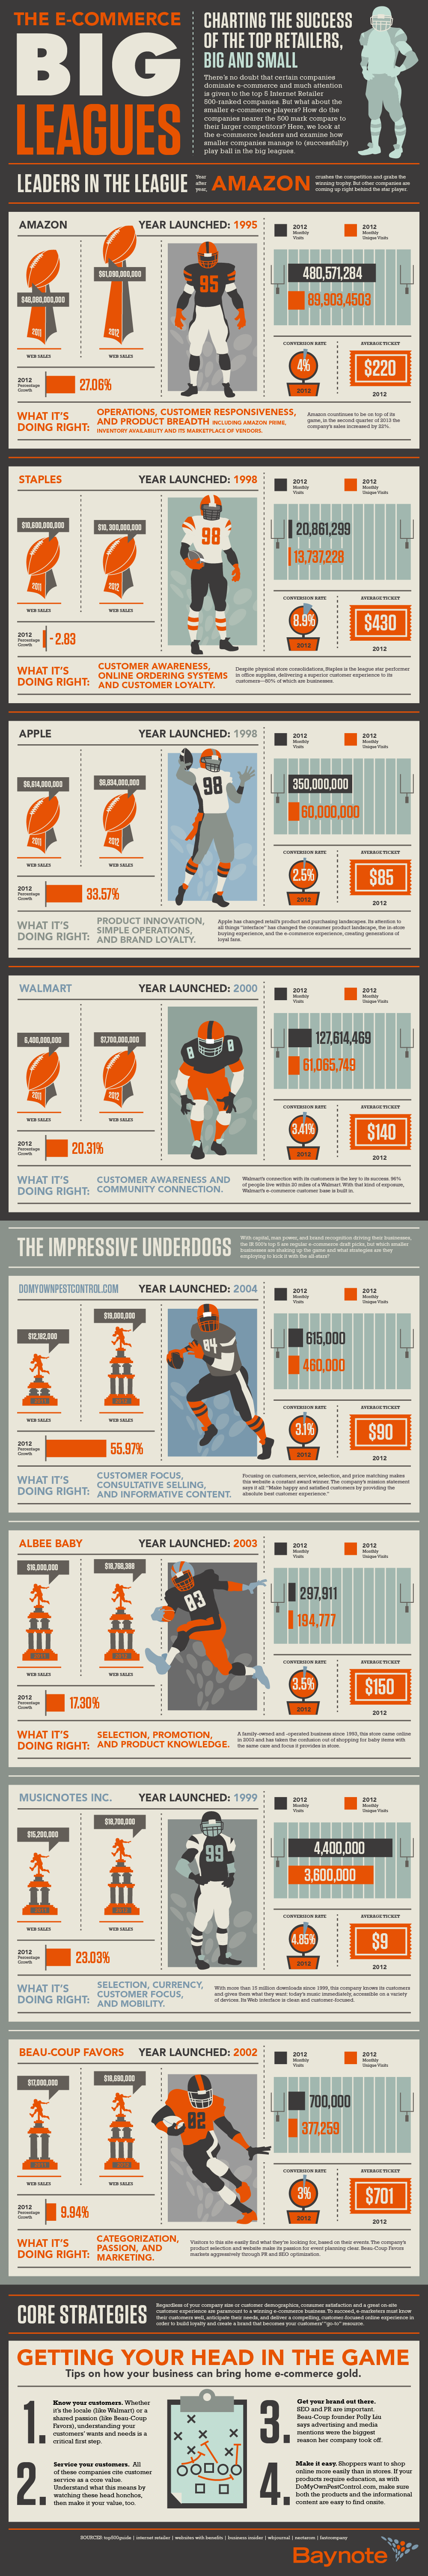 the-big-league-players-of-ecommerce-infographic